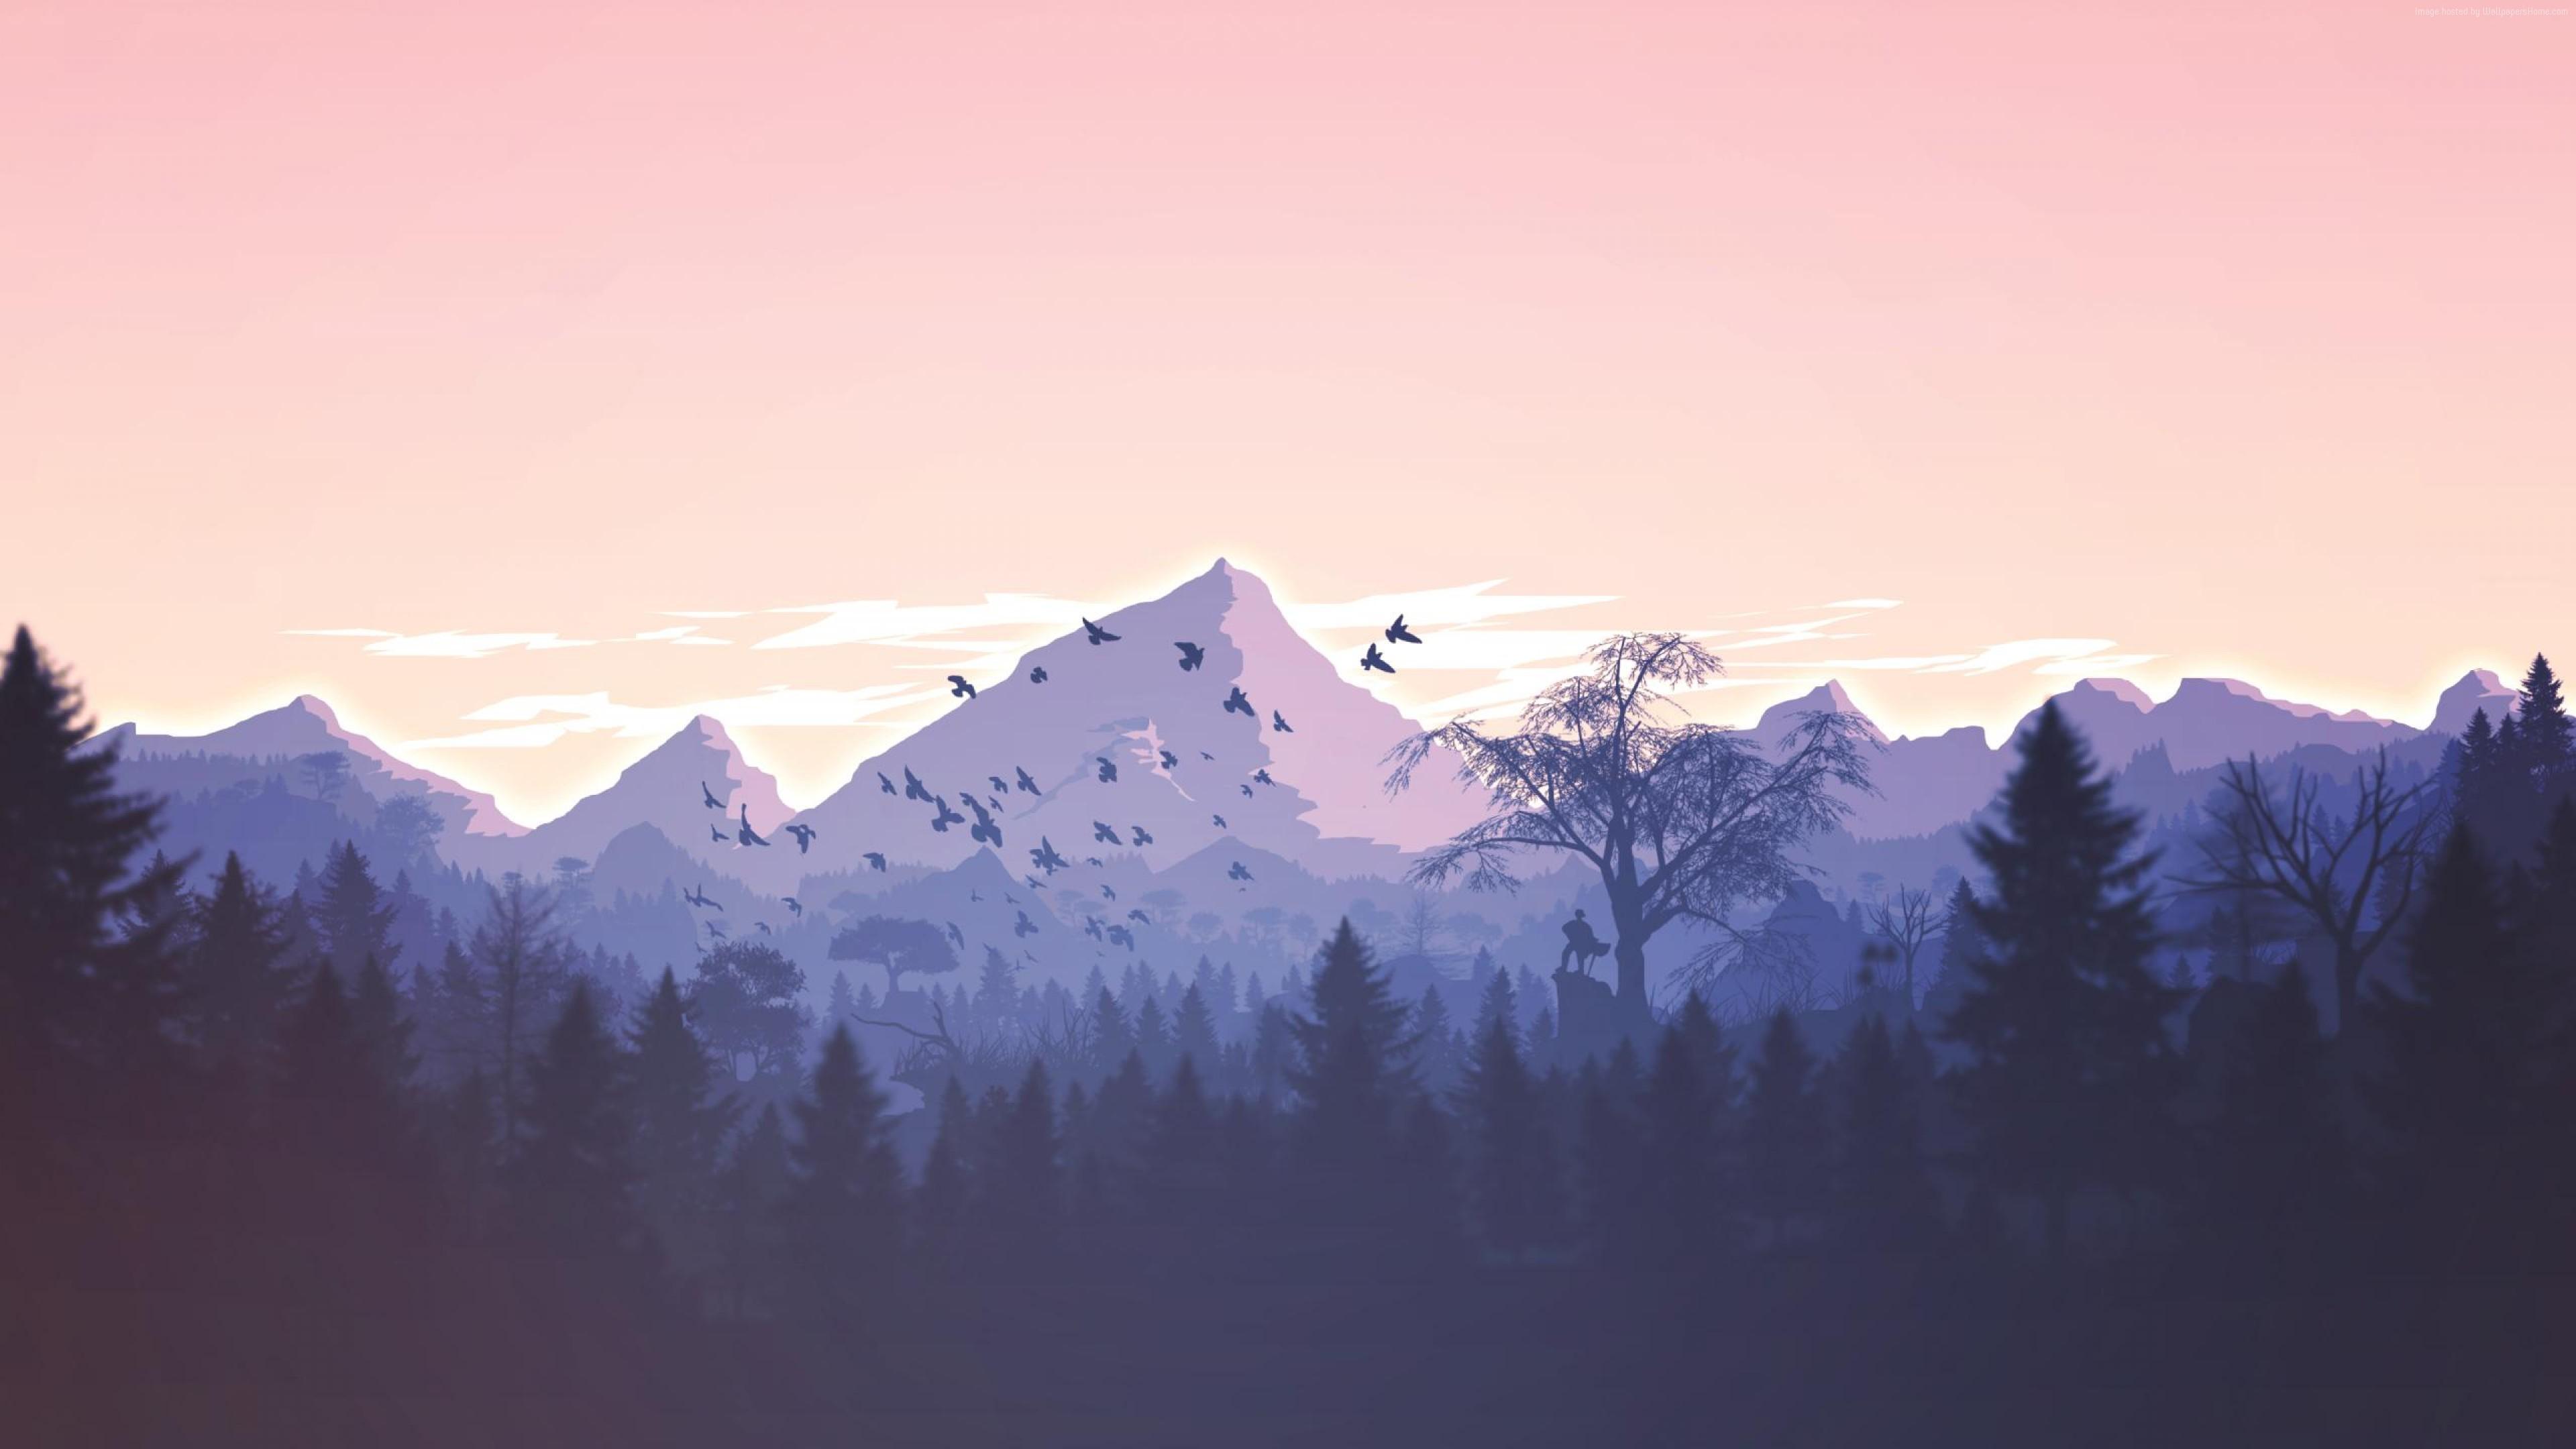 Abstract Mountains Wallpapers